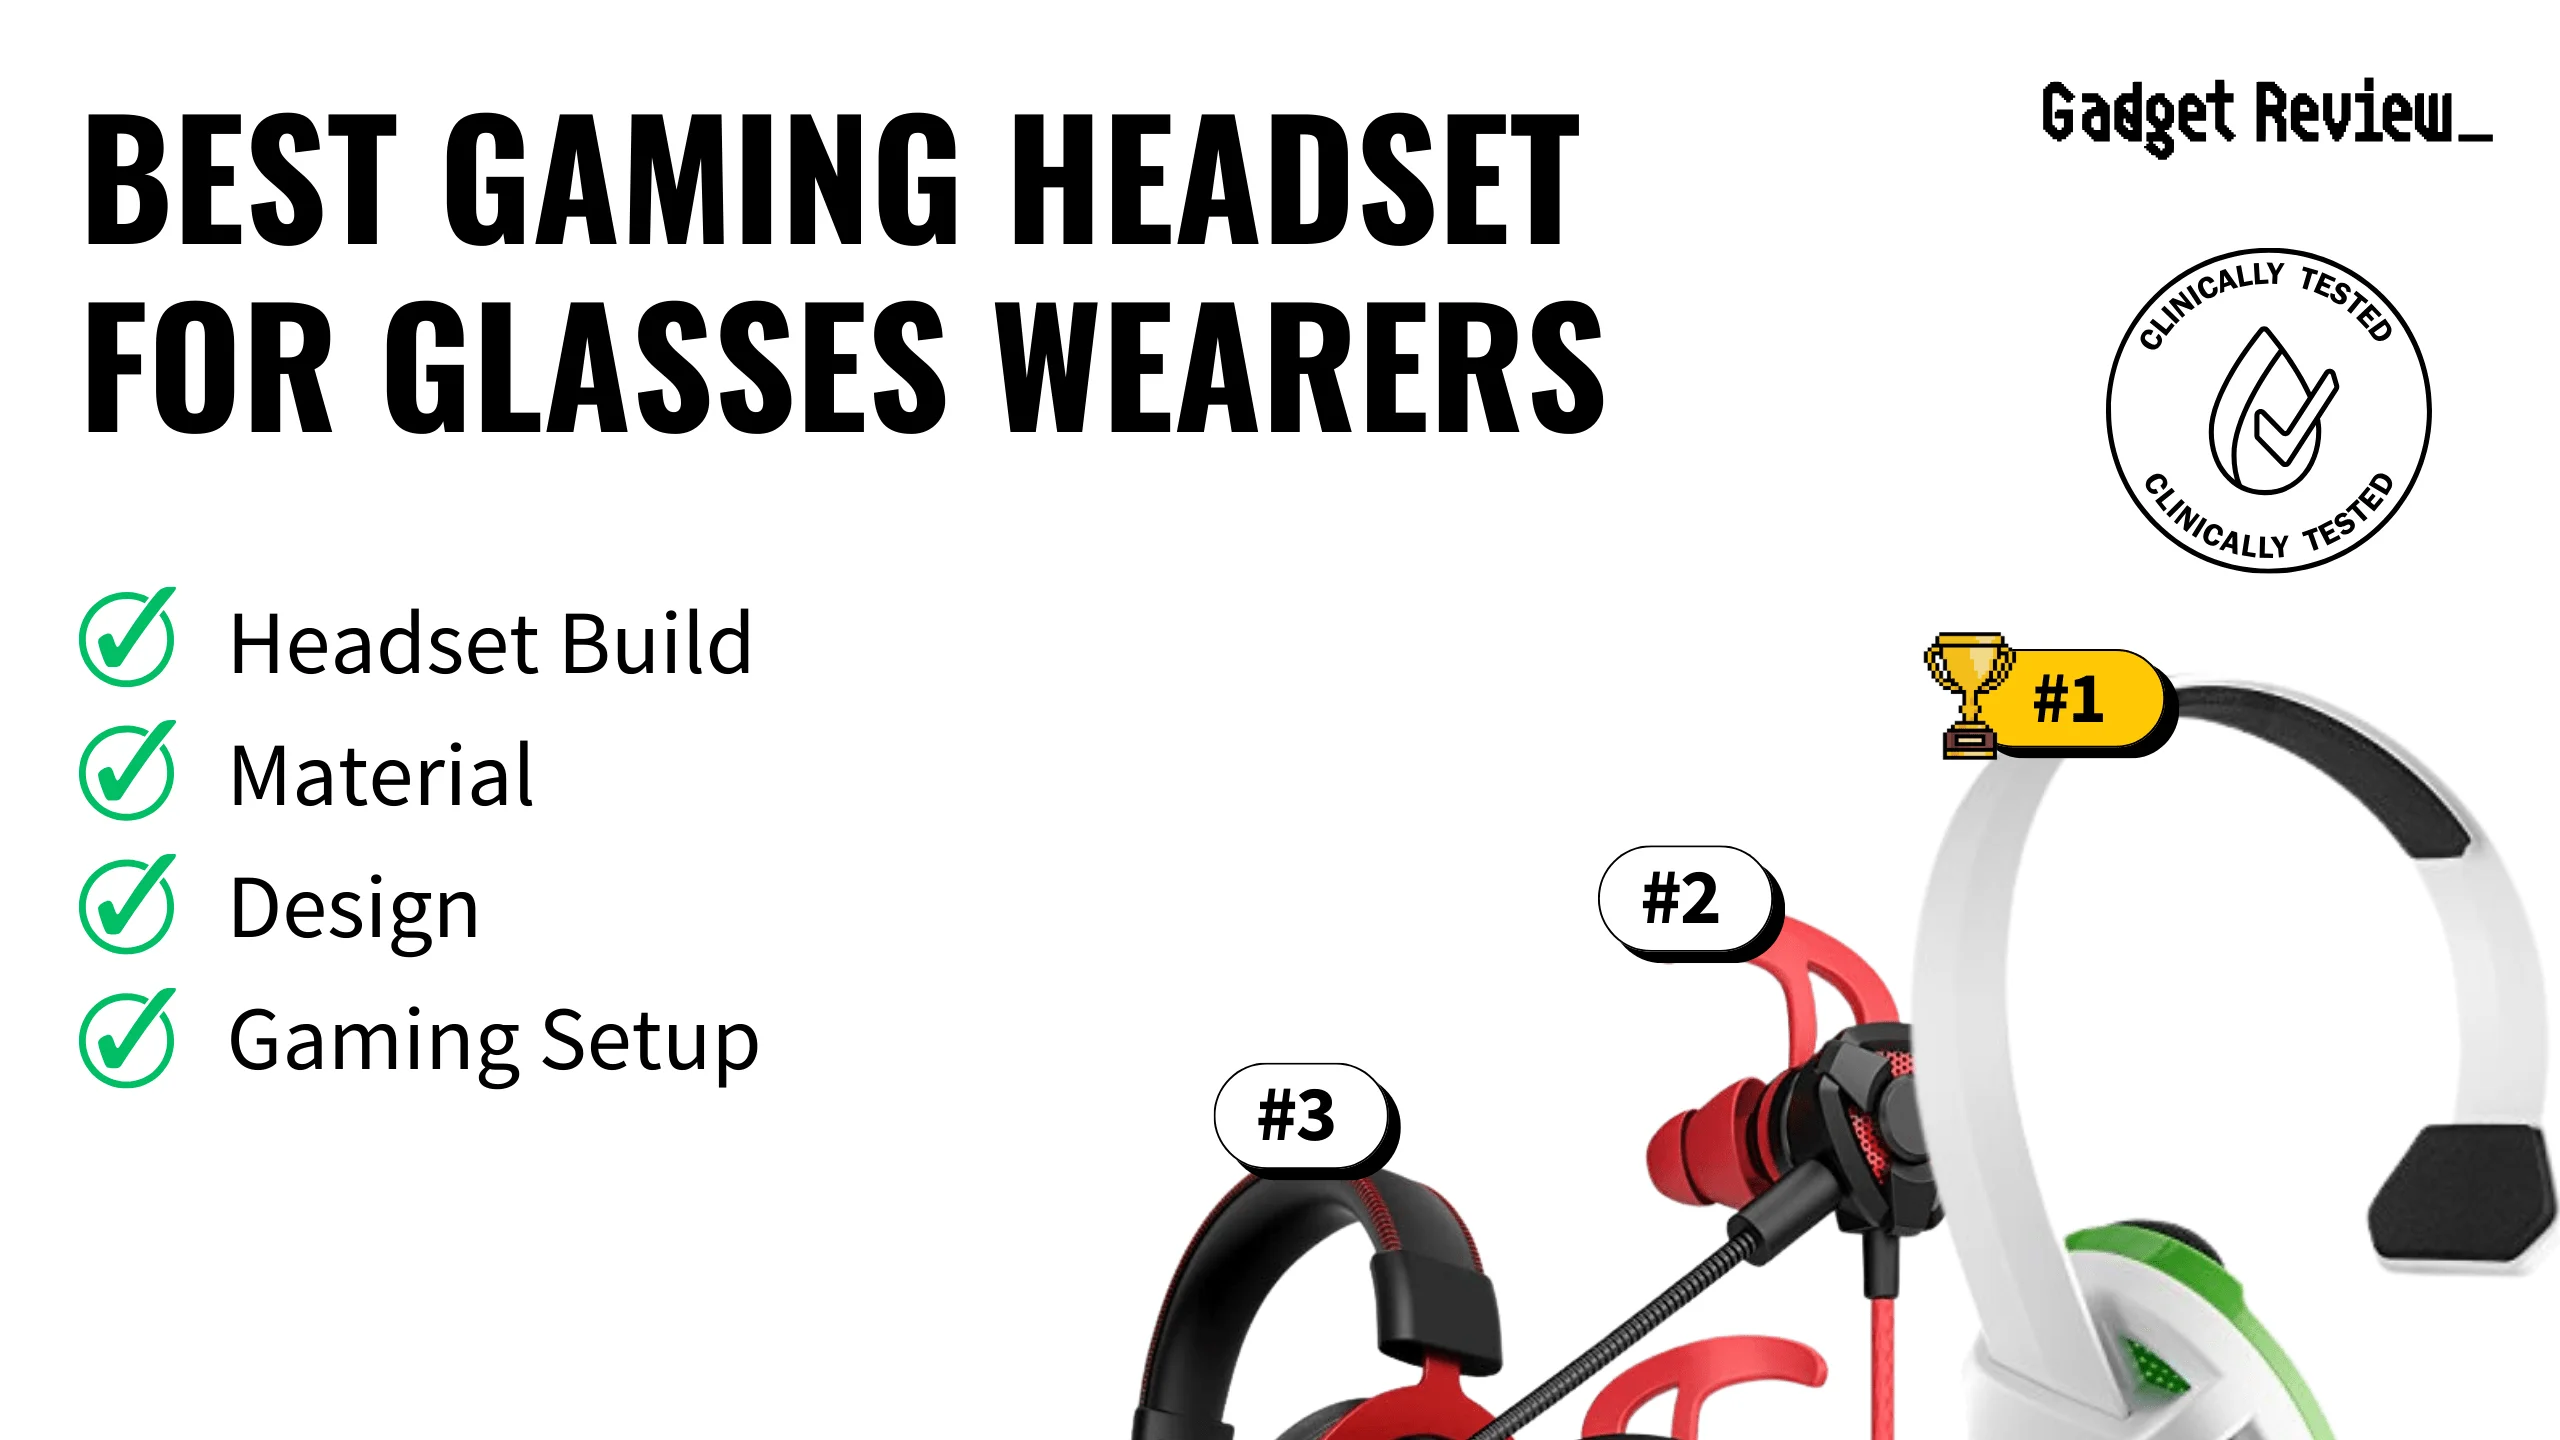 Best Gaming Headset for Glasses Wearers